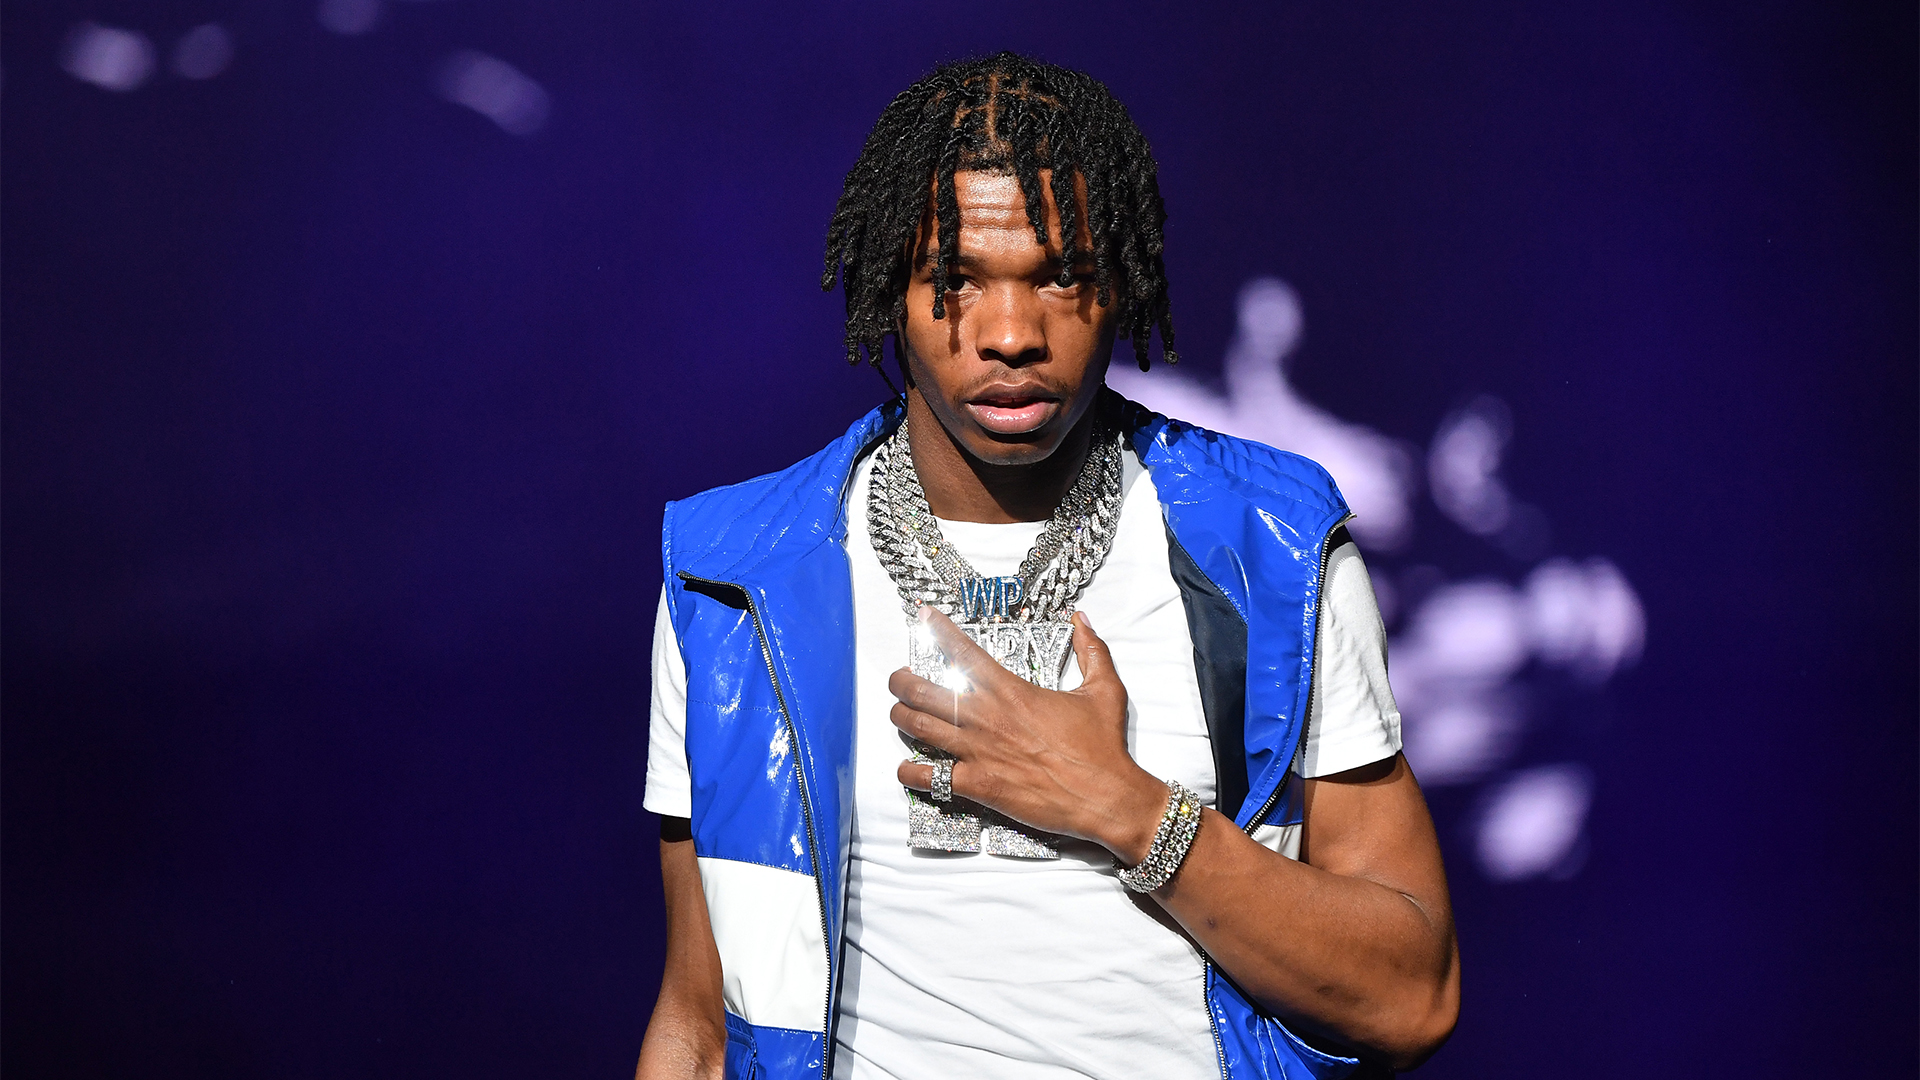 Lil Baby Beats Out Pop Star Faves As Vevo's Most-Viewed Artist Of The U.S. In 2021